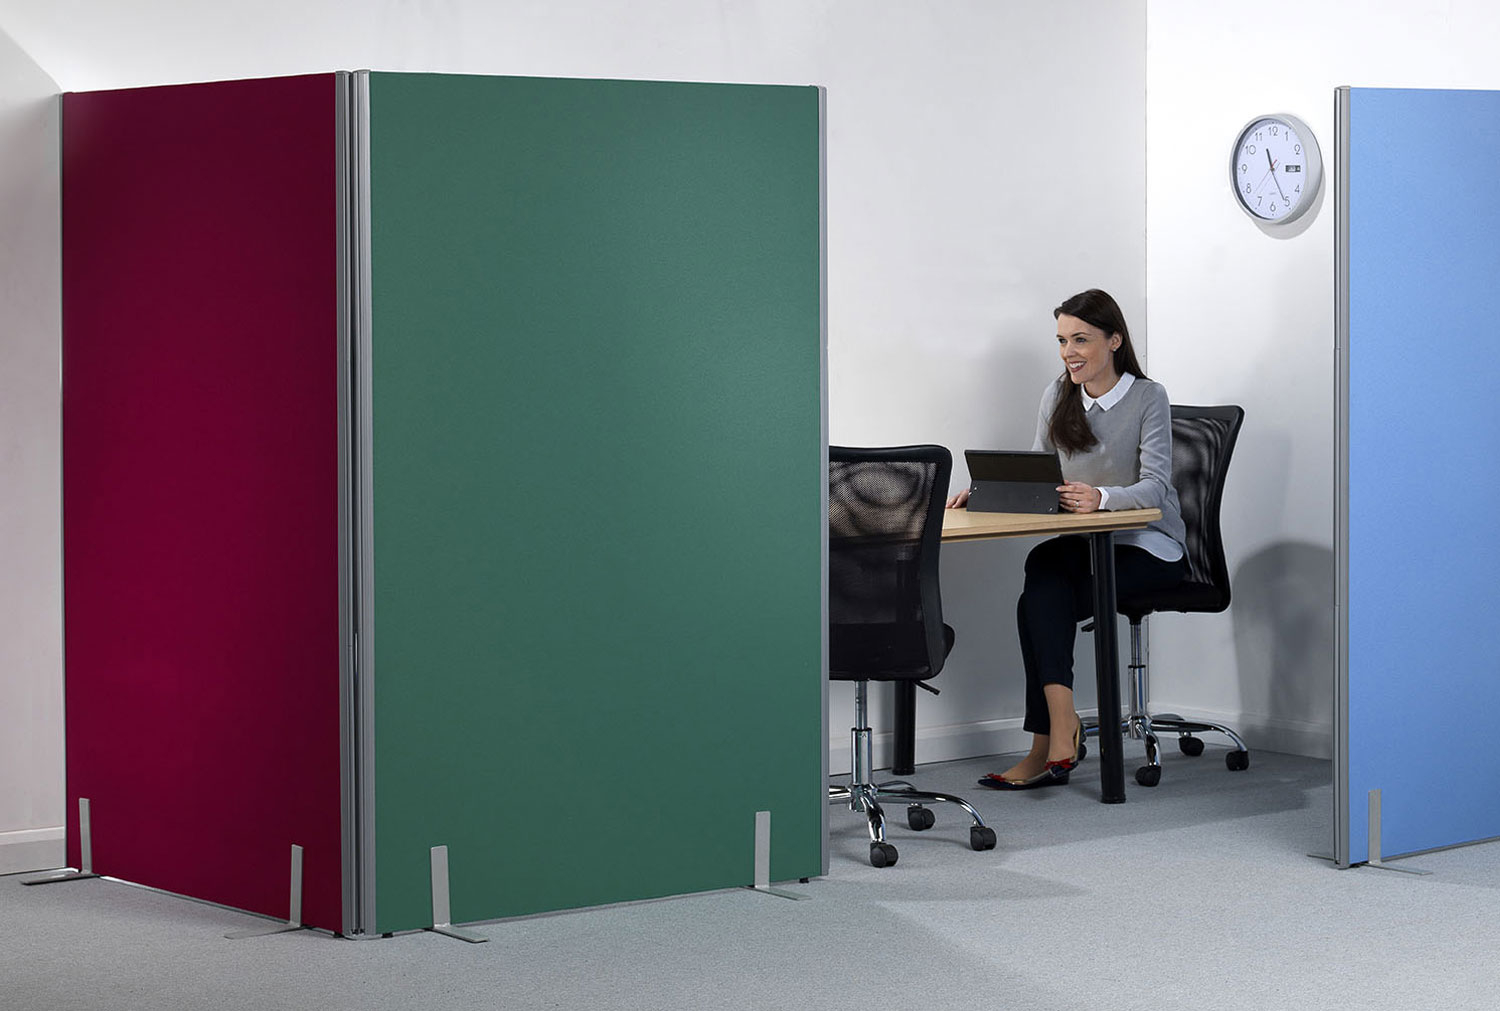 Space Divider Floor Office Screens, 150wx180h (cm), Forest